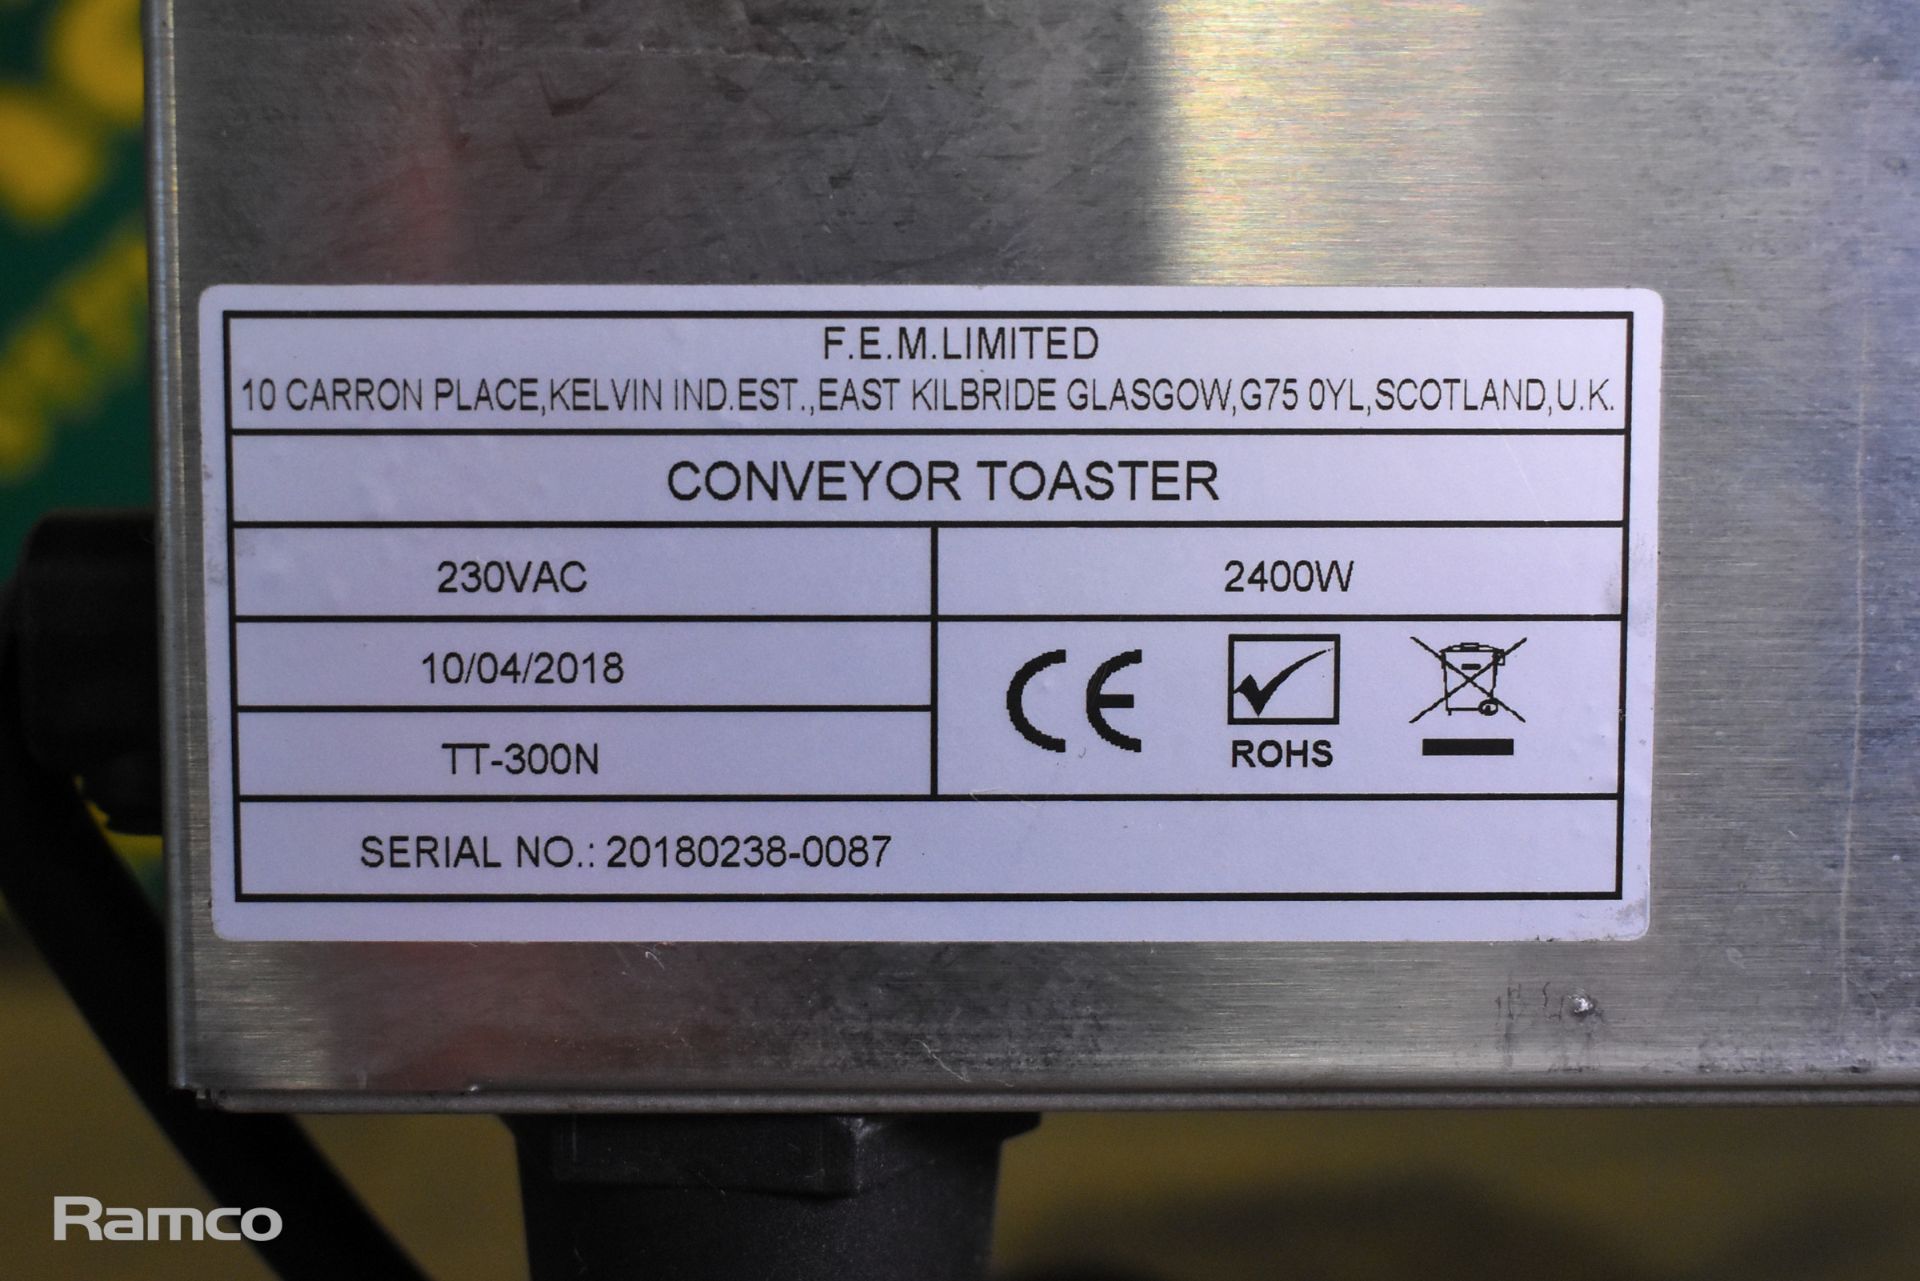 Chefmaster stainless steel conveyor toaster - Image 6 of 6